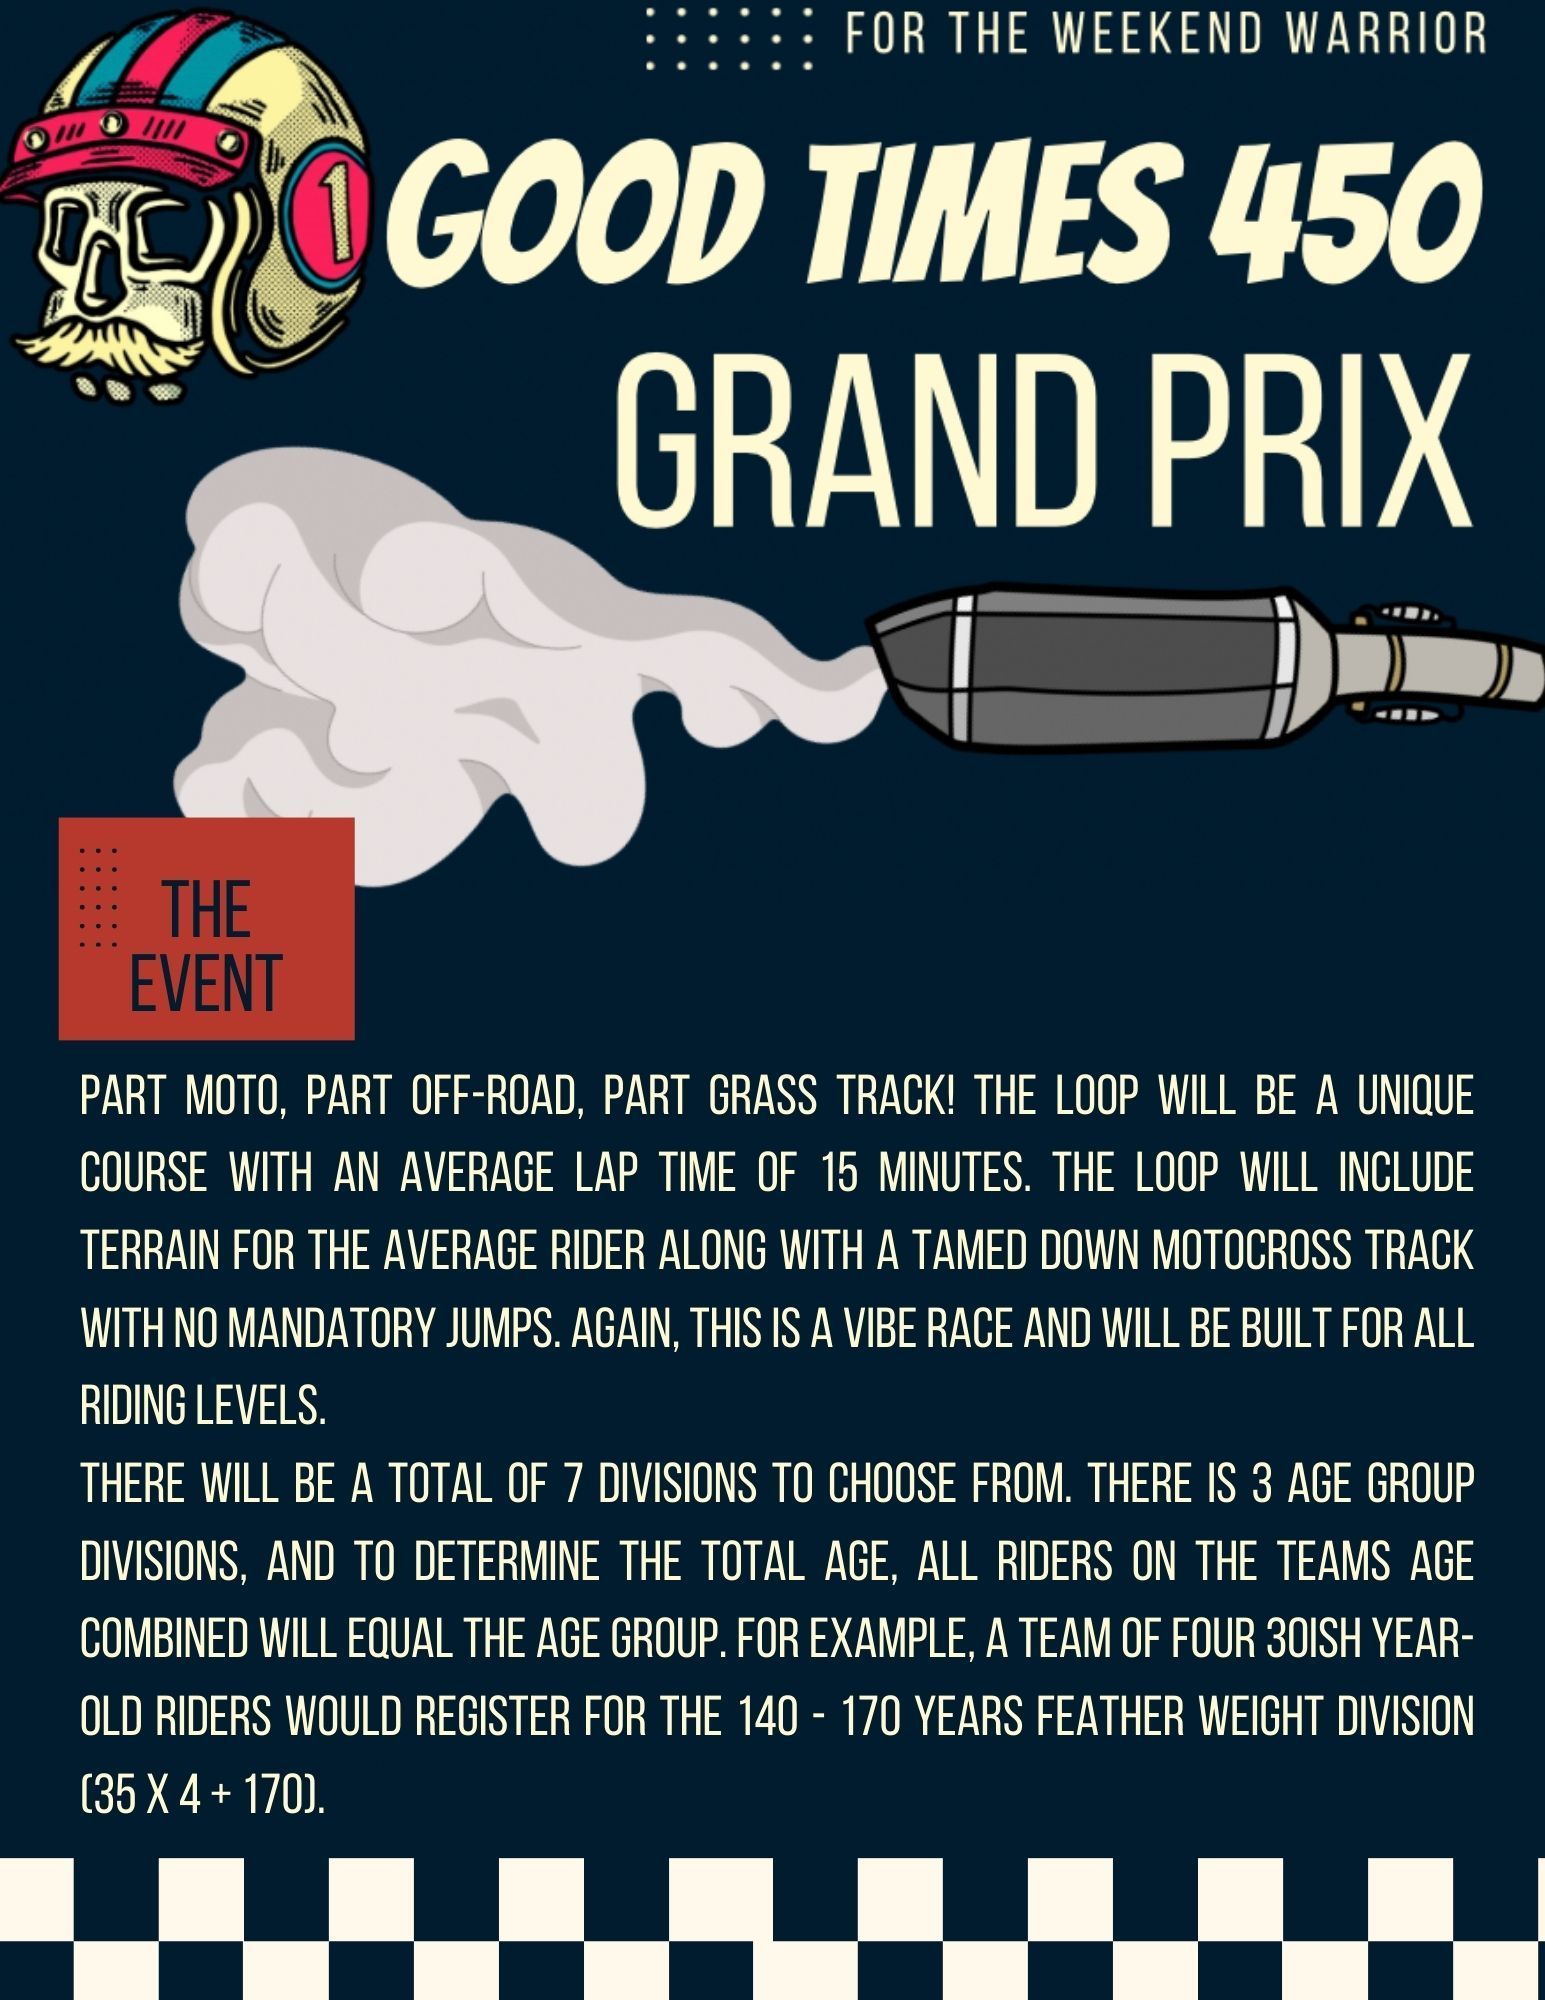 A poster for the weekend warrior good times 450 grand prix